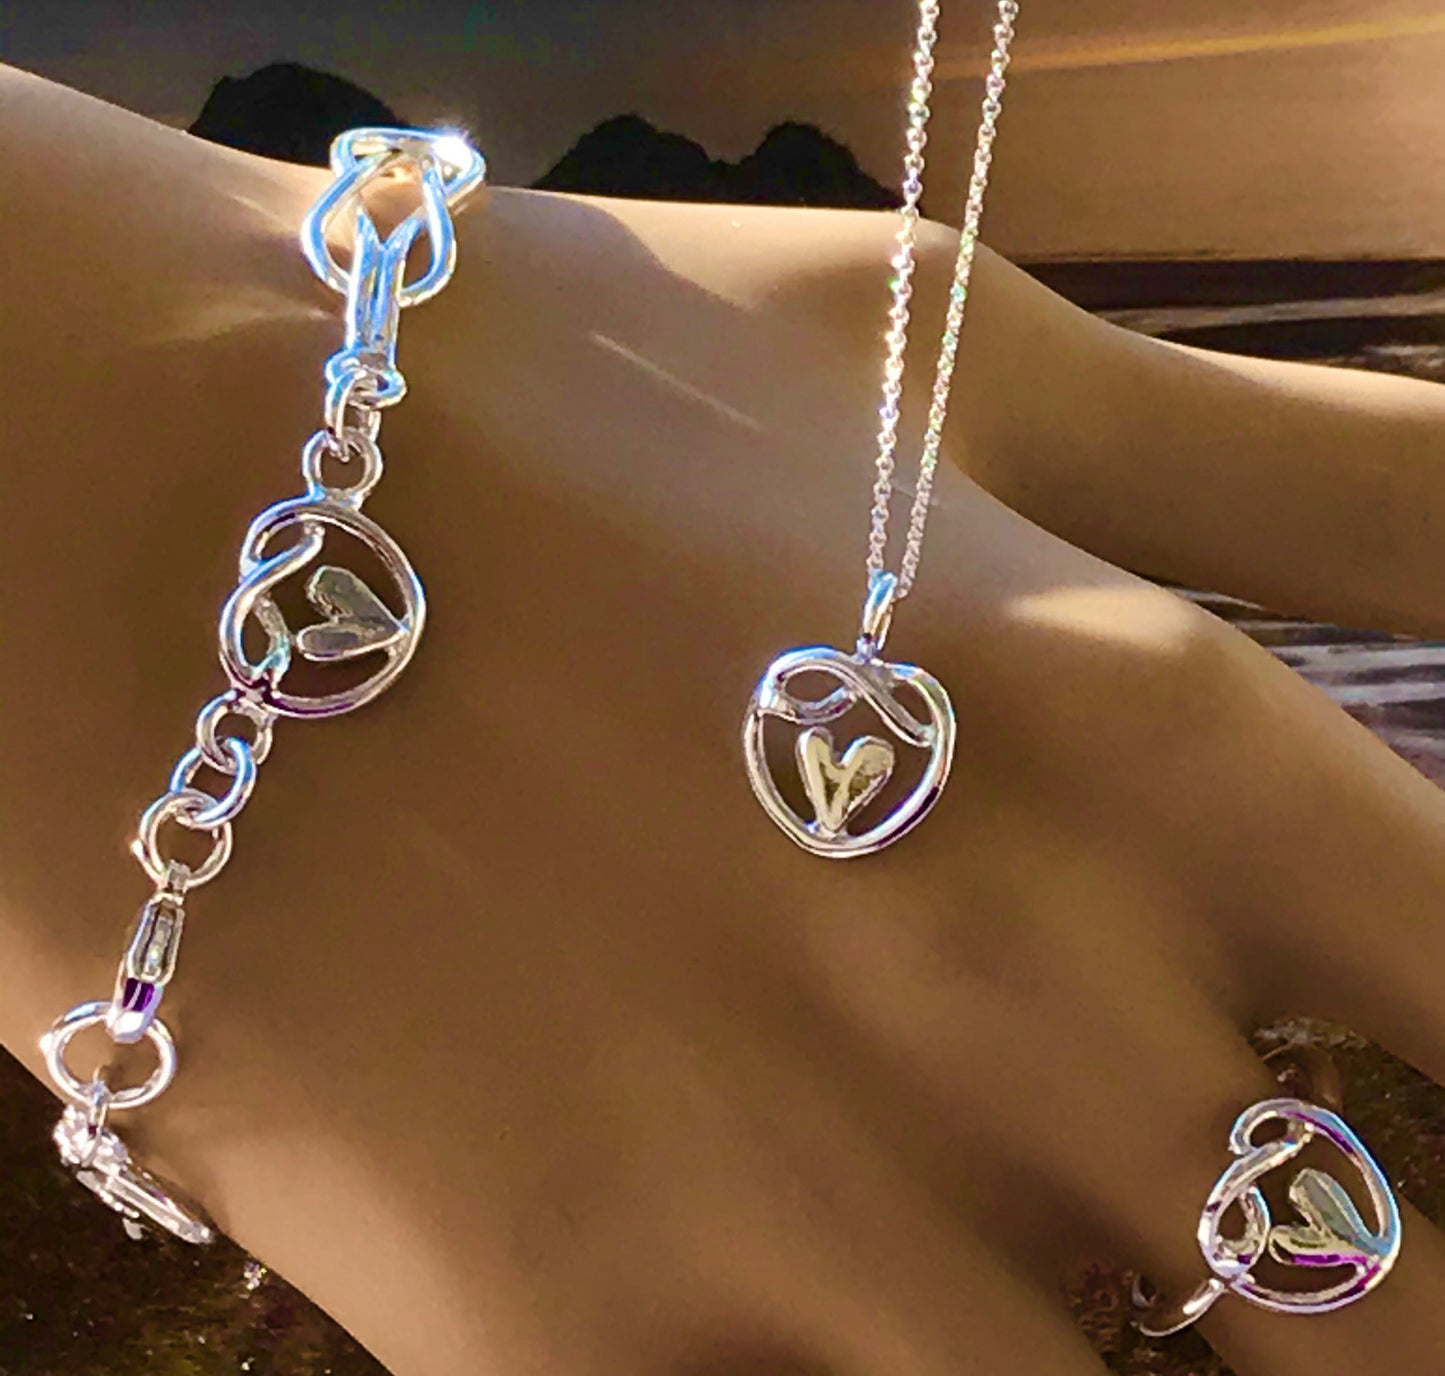 Heart of friendship knot necklace